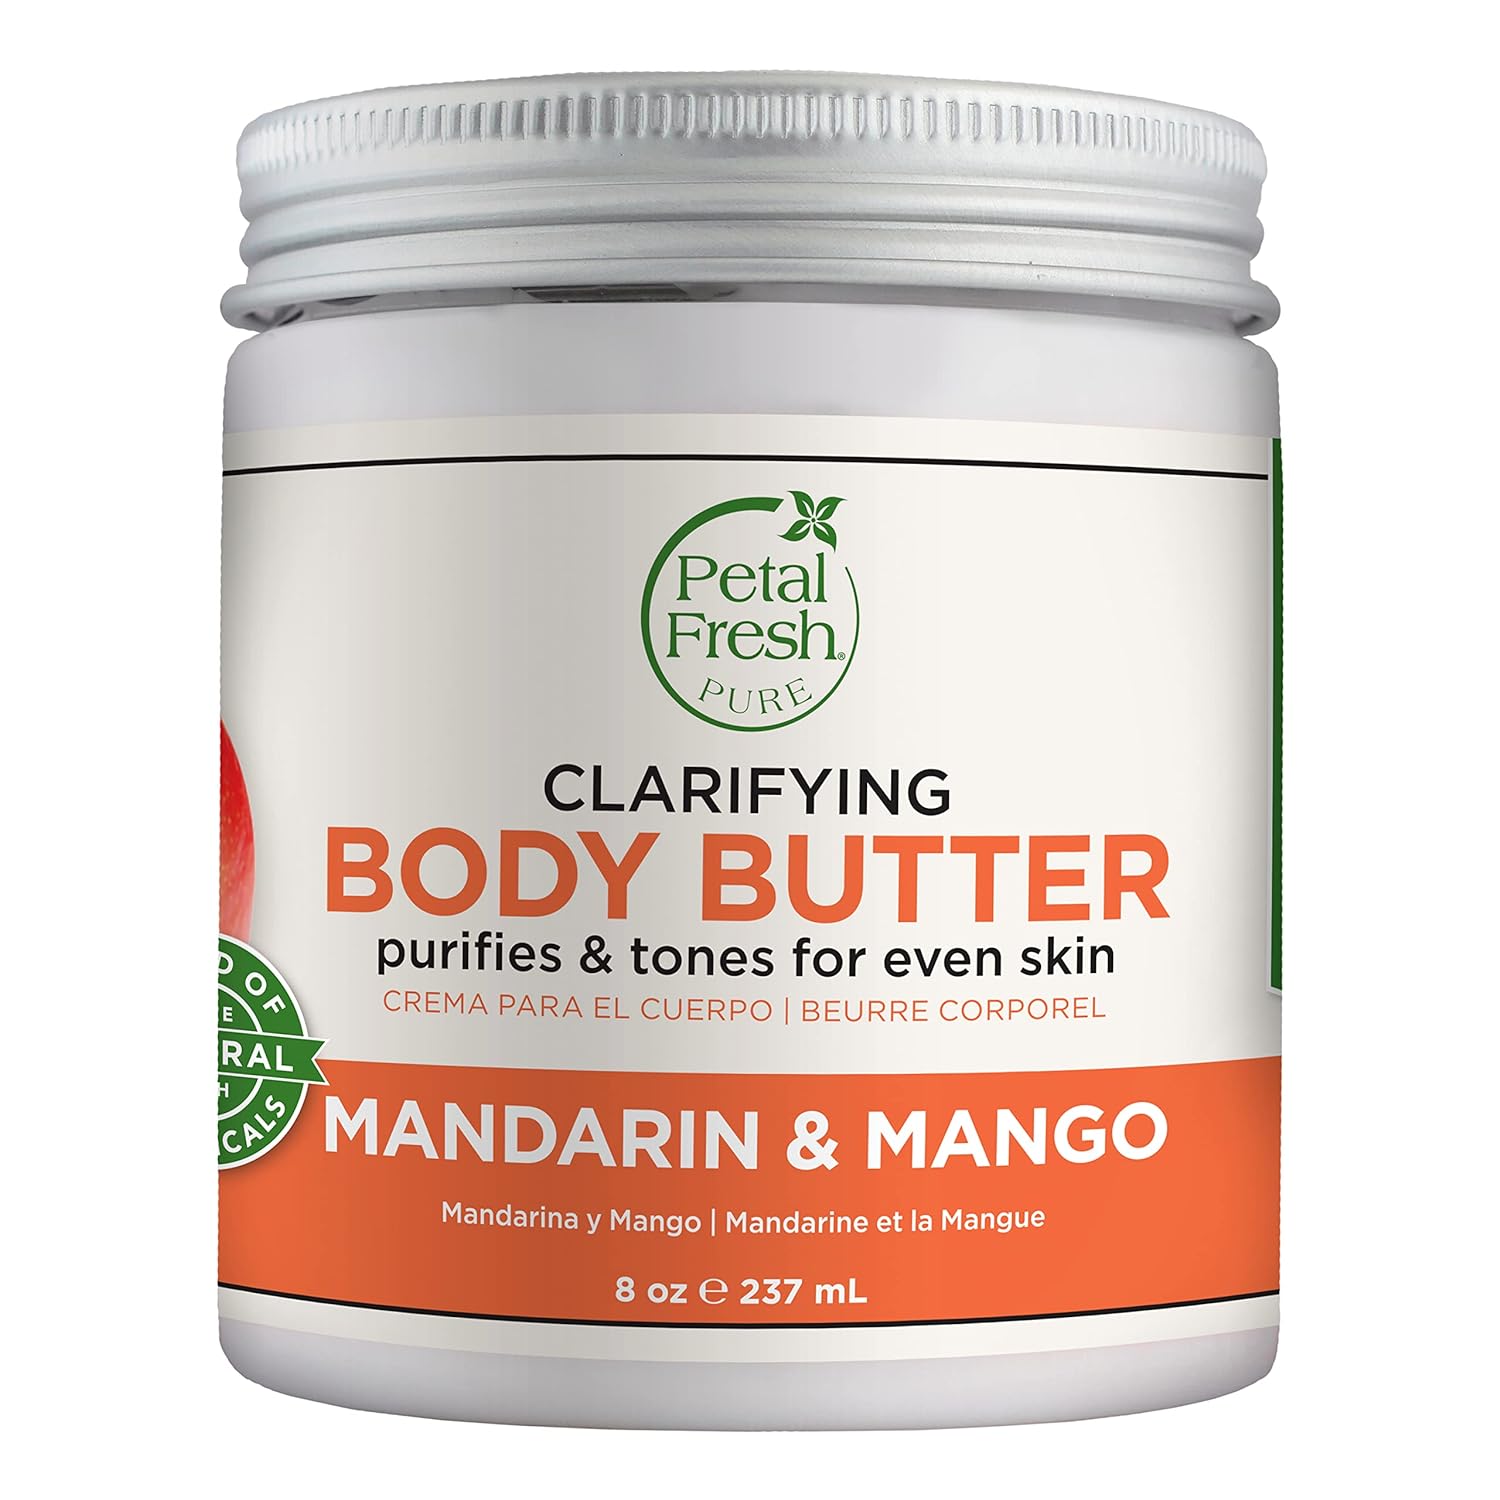 Petal Fresh Pure Clarifying Mandarin & Mango Body Butter, Organic Coconut Oil, Argan Oil, Shea Butter, Purifying and Toning, For All Skin Tupes, Natural Ingredients, Vegan and Cruelty Free, 8 oz